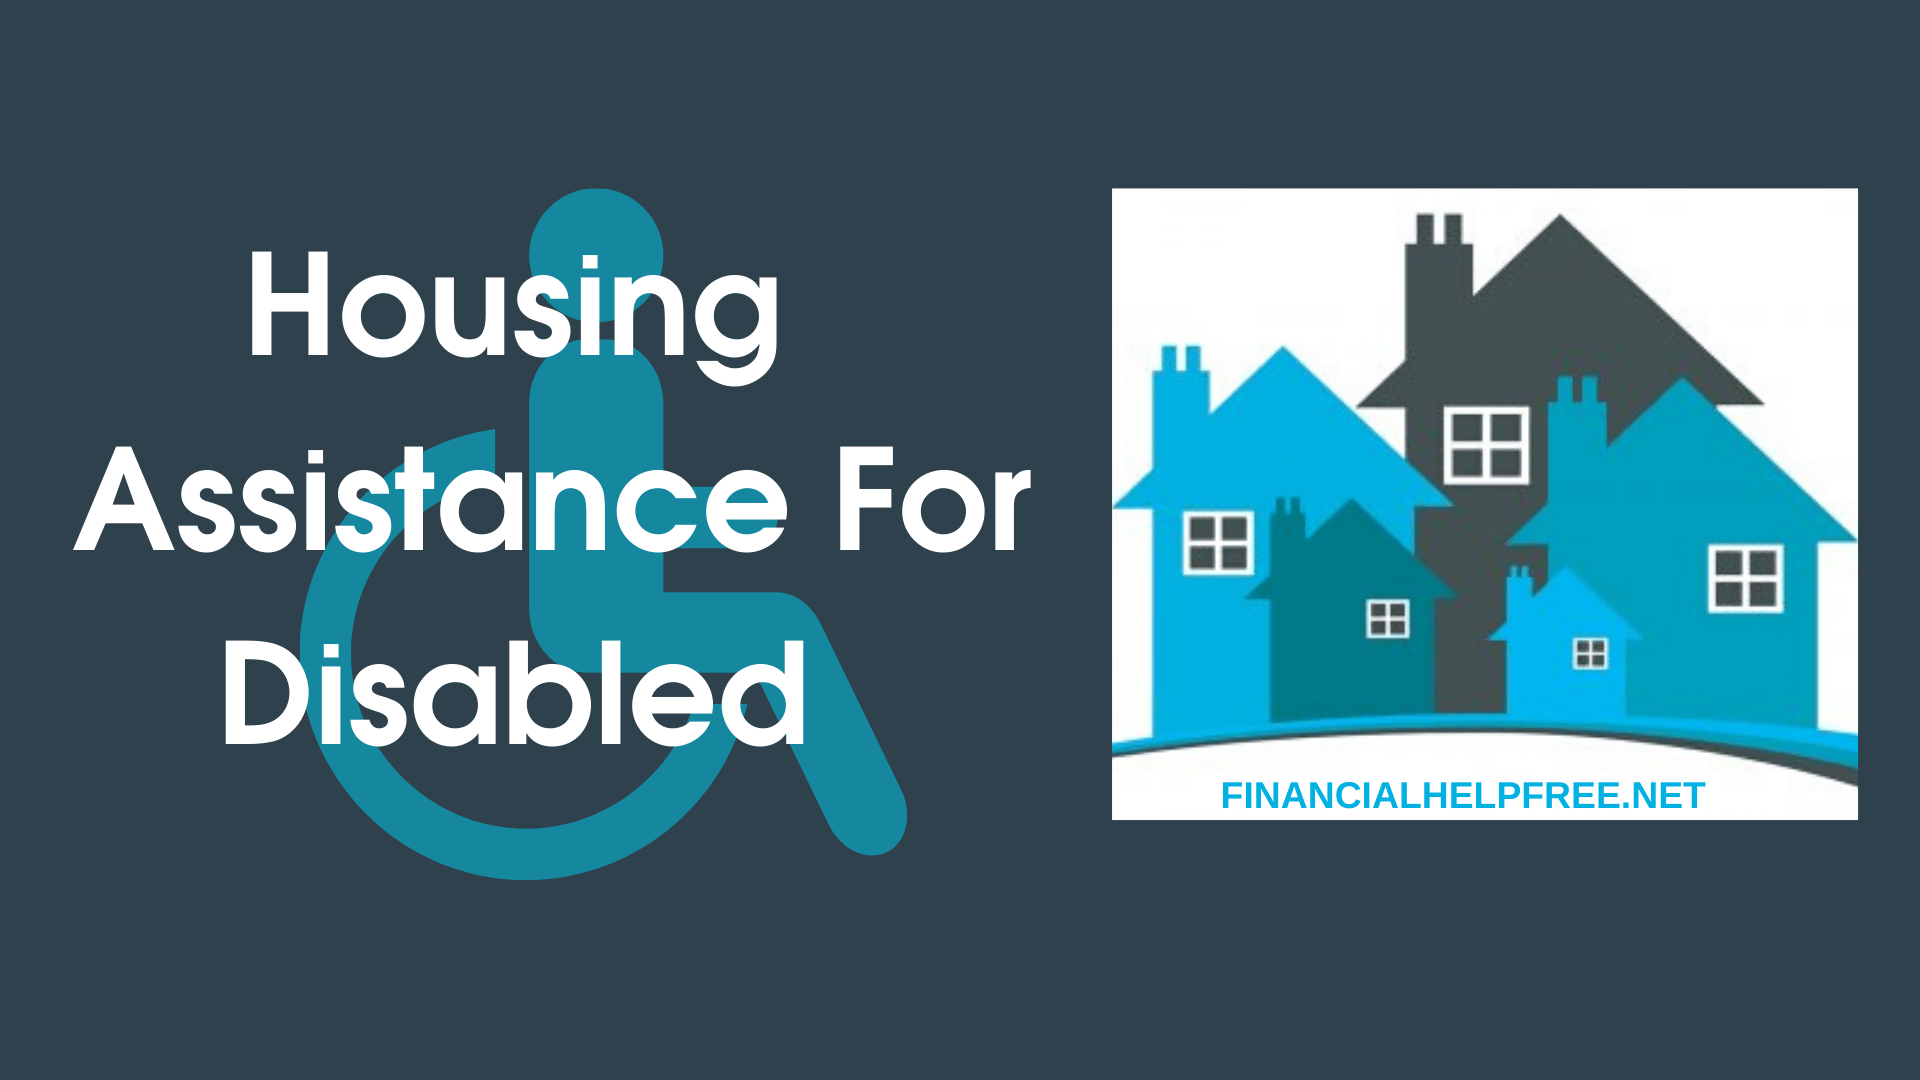 Housing Assistance For Disabled